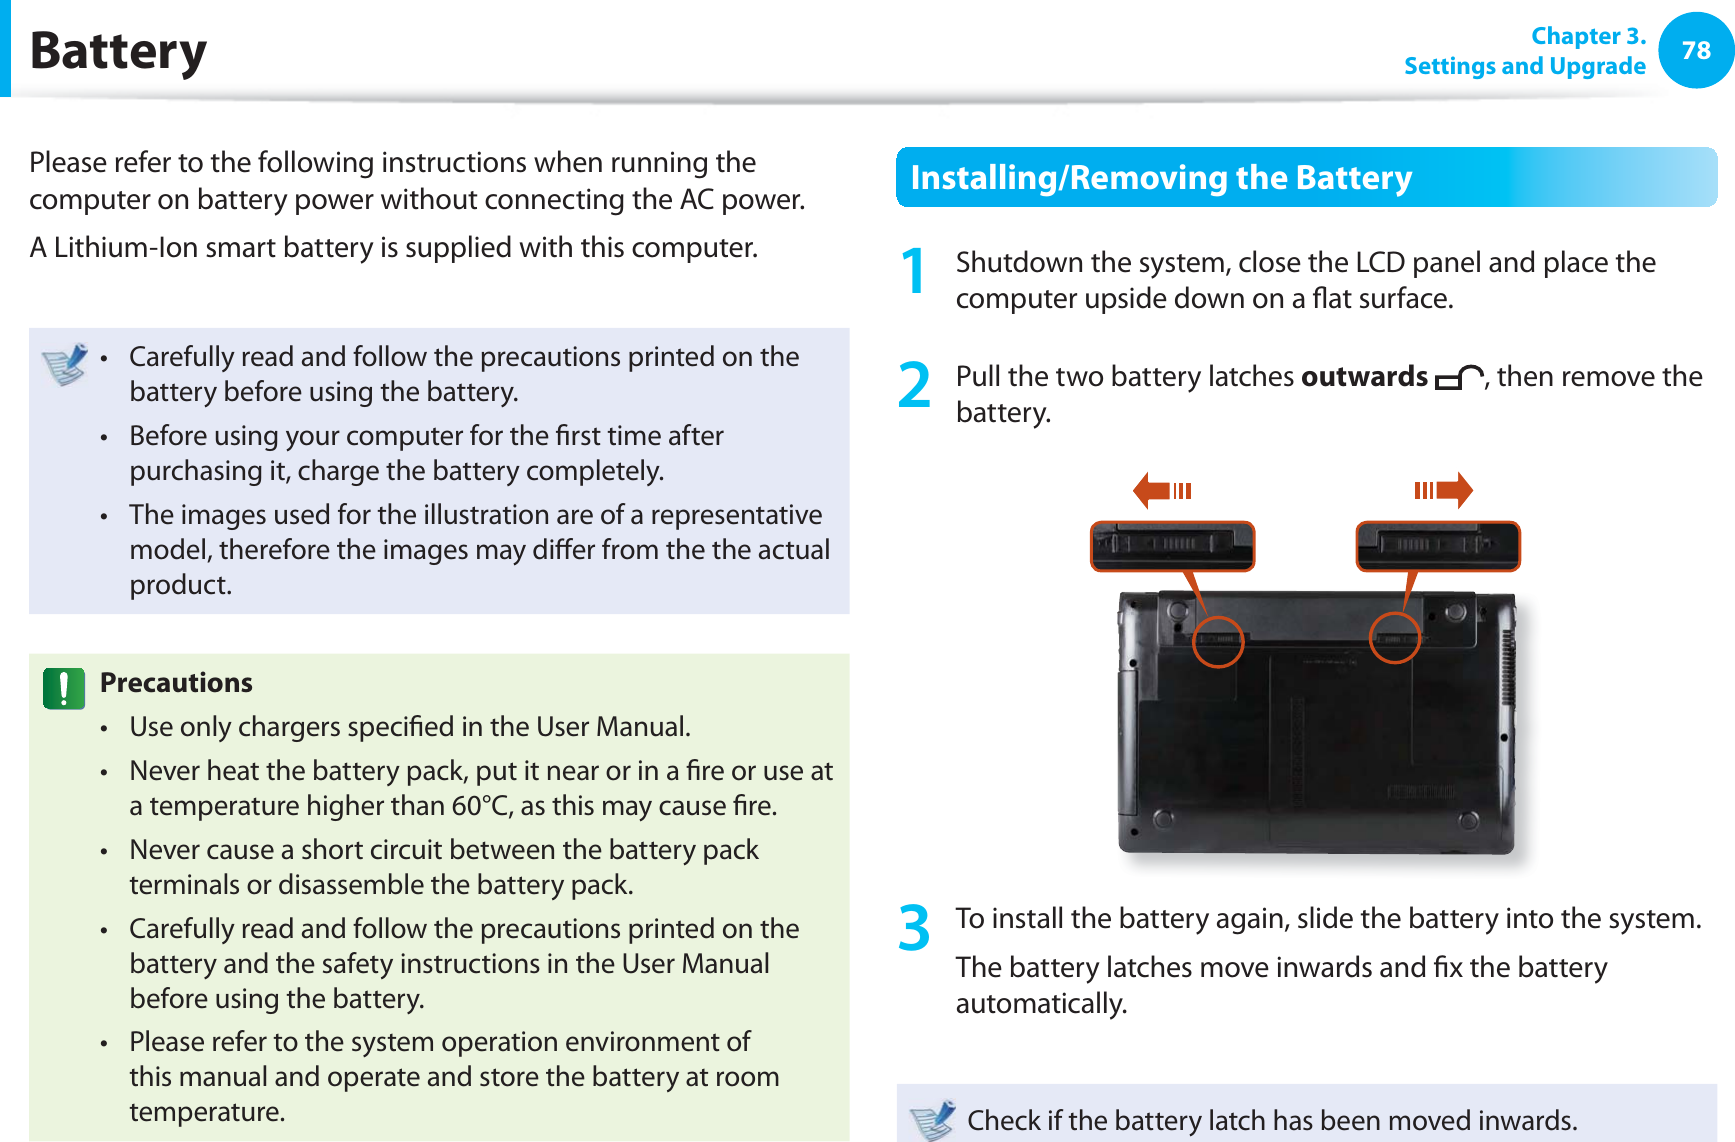 78 Chapter  3.Settings and Upgrade BatteryPlease refer to the following instructions when running the computer on battery power without connecting the AC power. A Lithium-Ion smart battery is supplied with this computer.Carefully read and follow the precautions printed on the t battery before using the battery.Before using your computer for the ﬁ rst time after t purchasing it, charge the battery completely.The images used for the illustration are of a representative t model, therefore the images may diﬀ er from the the actual product.  PrecautionsUse only chargers speciﬁ ed in the User Manual.t Never heat the battery pack, put it near or in a ﬁ re or use at t a temperature higher than 60°C, as this may cause ﬁ re.Never cause a short circuit between the battery pack t terminals or disassemble the battery pack. Carefully read and follow the precautions printed on the t battery and the safety instructions in the User Manual before using the battery.Please refer to the system operation environment of t this manual and operate and store the battery at room temperature.Installing/Removing the Battery1  Shutdown the system, close the LCD panel and place the computer upside down on a ﬂ at surface.2  Pull the two  battery latches outwards , then remove the battery.3  To install the battery again, slide the battery into the system. The battery latches move inwards and ﬁ x the battery automatically.Check if the battery latch has been moved inwards.